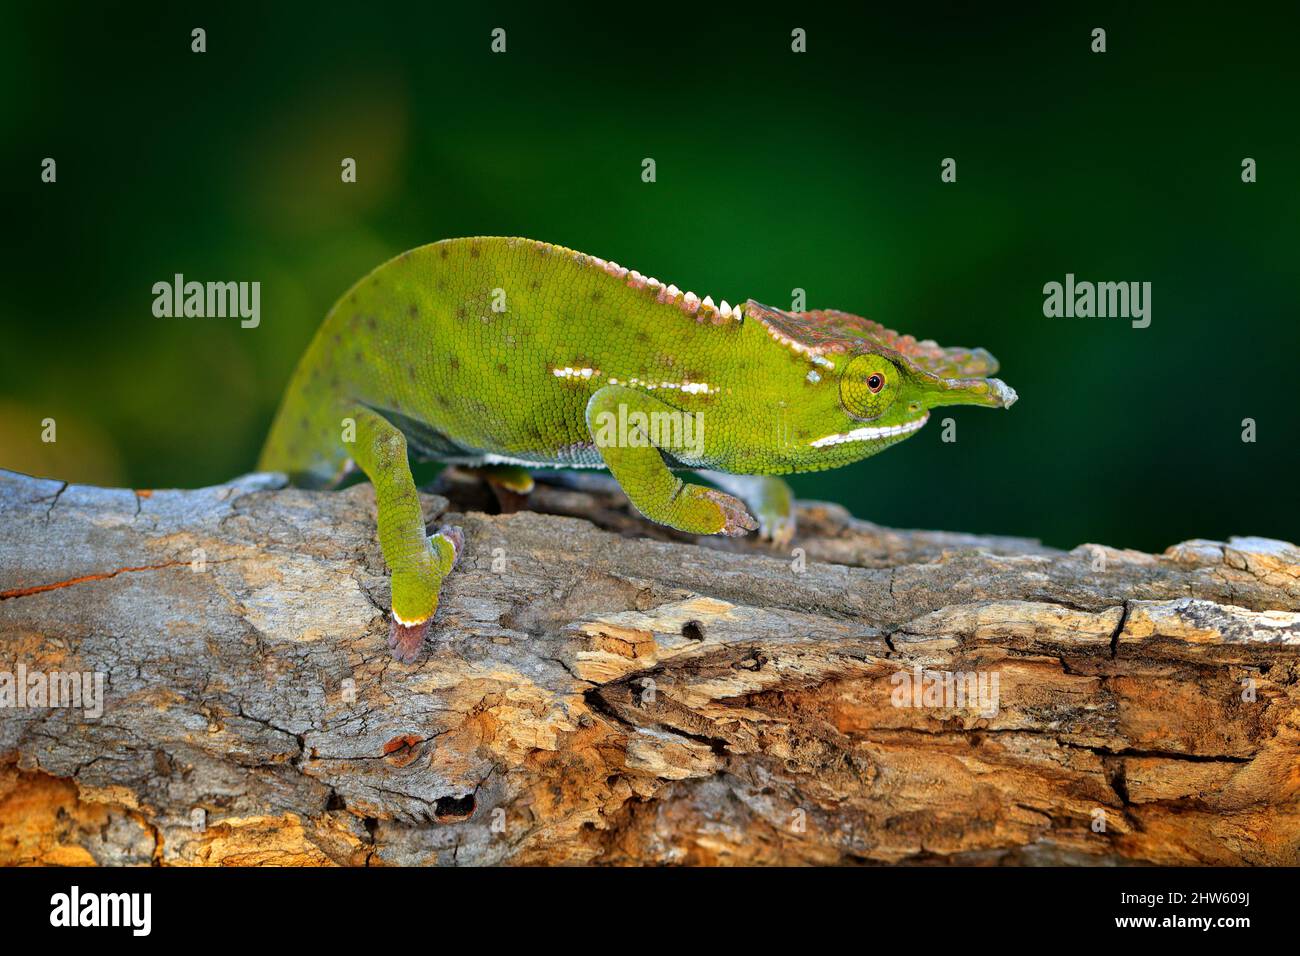 Furcifer willsii, Canopy Wills chameleon, sitting on the branch in forest habitat. Exotic beautiful endemic green reptile with long tail from Madagasc Stock Photo